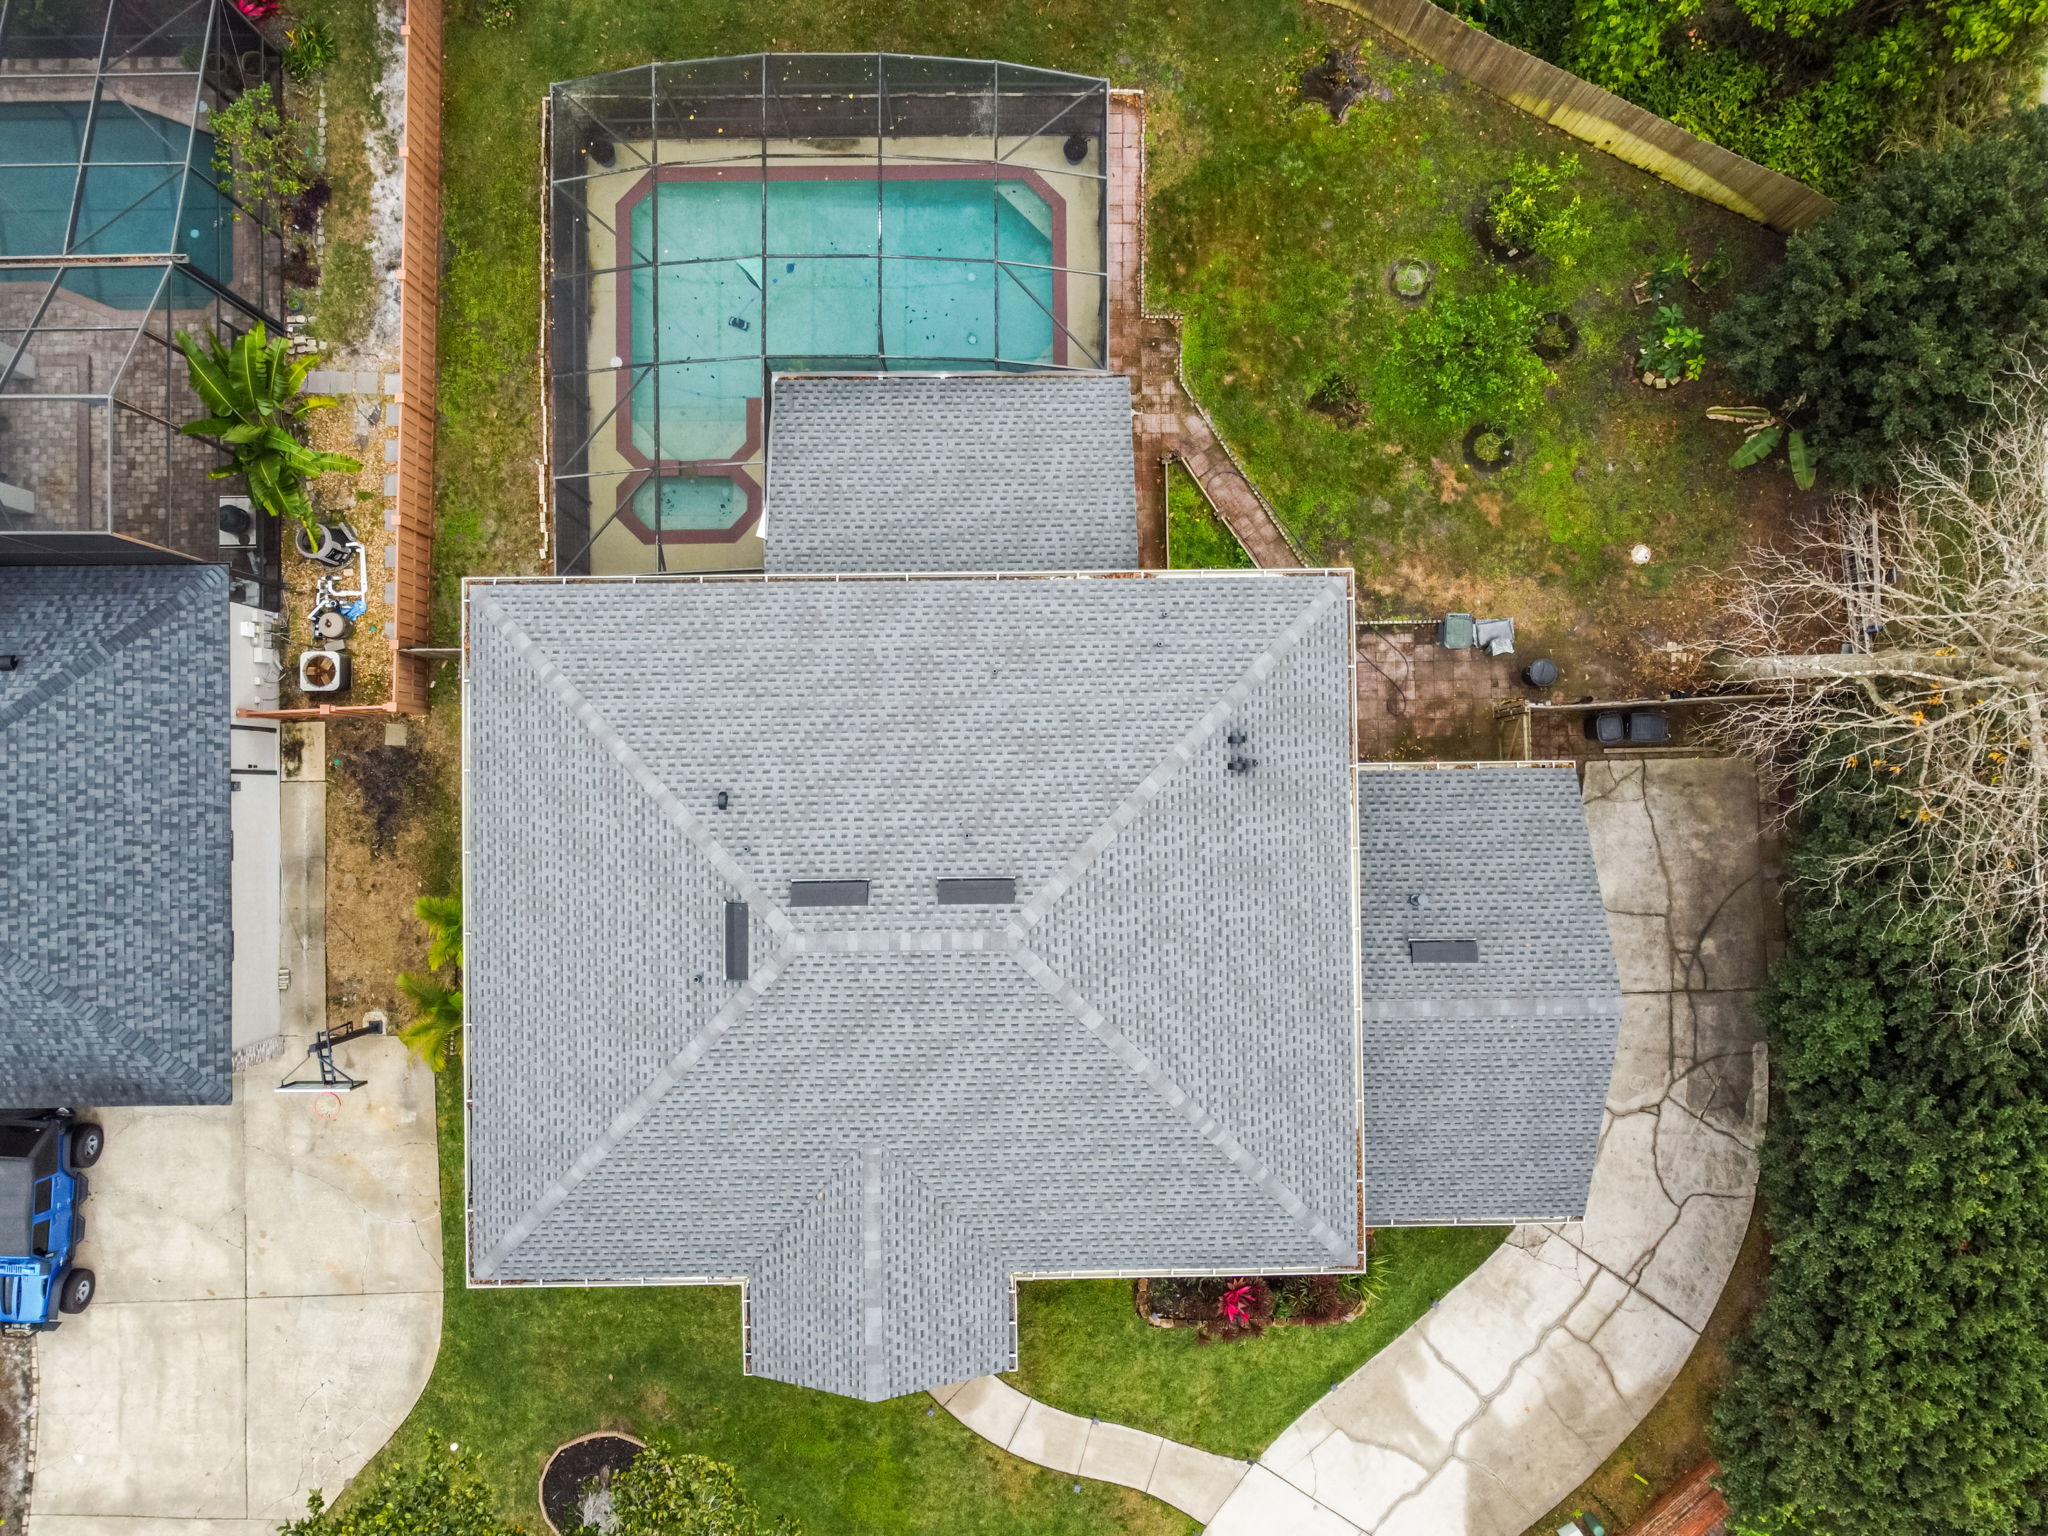 Aerial Lot View